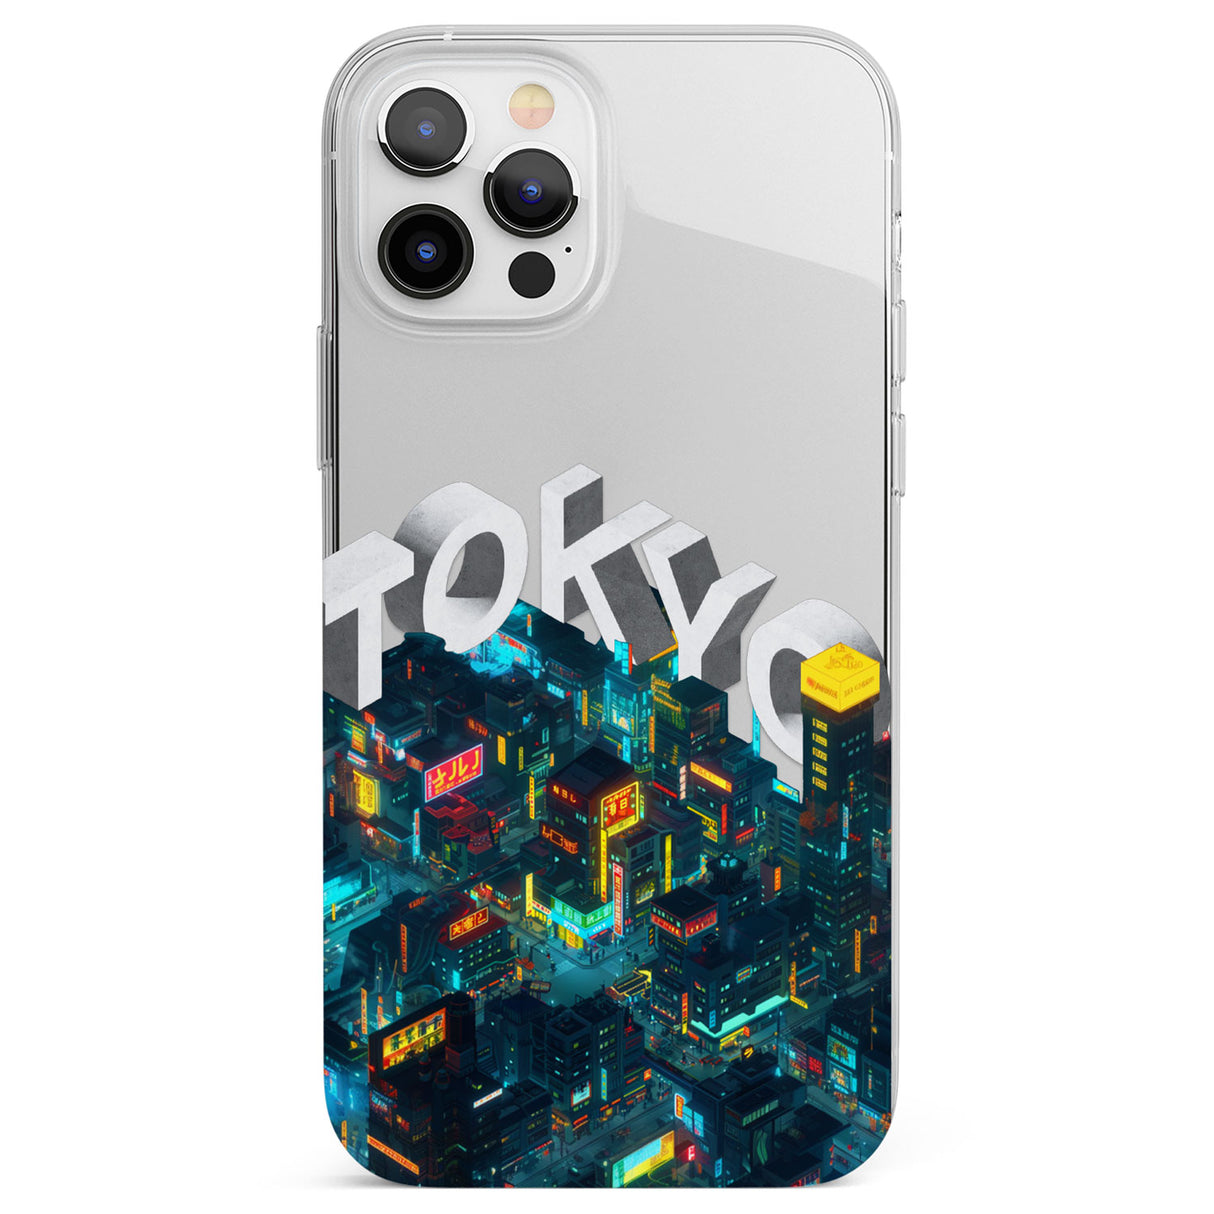 Tokyo Phone Case for iPhone 12 Pro